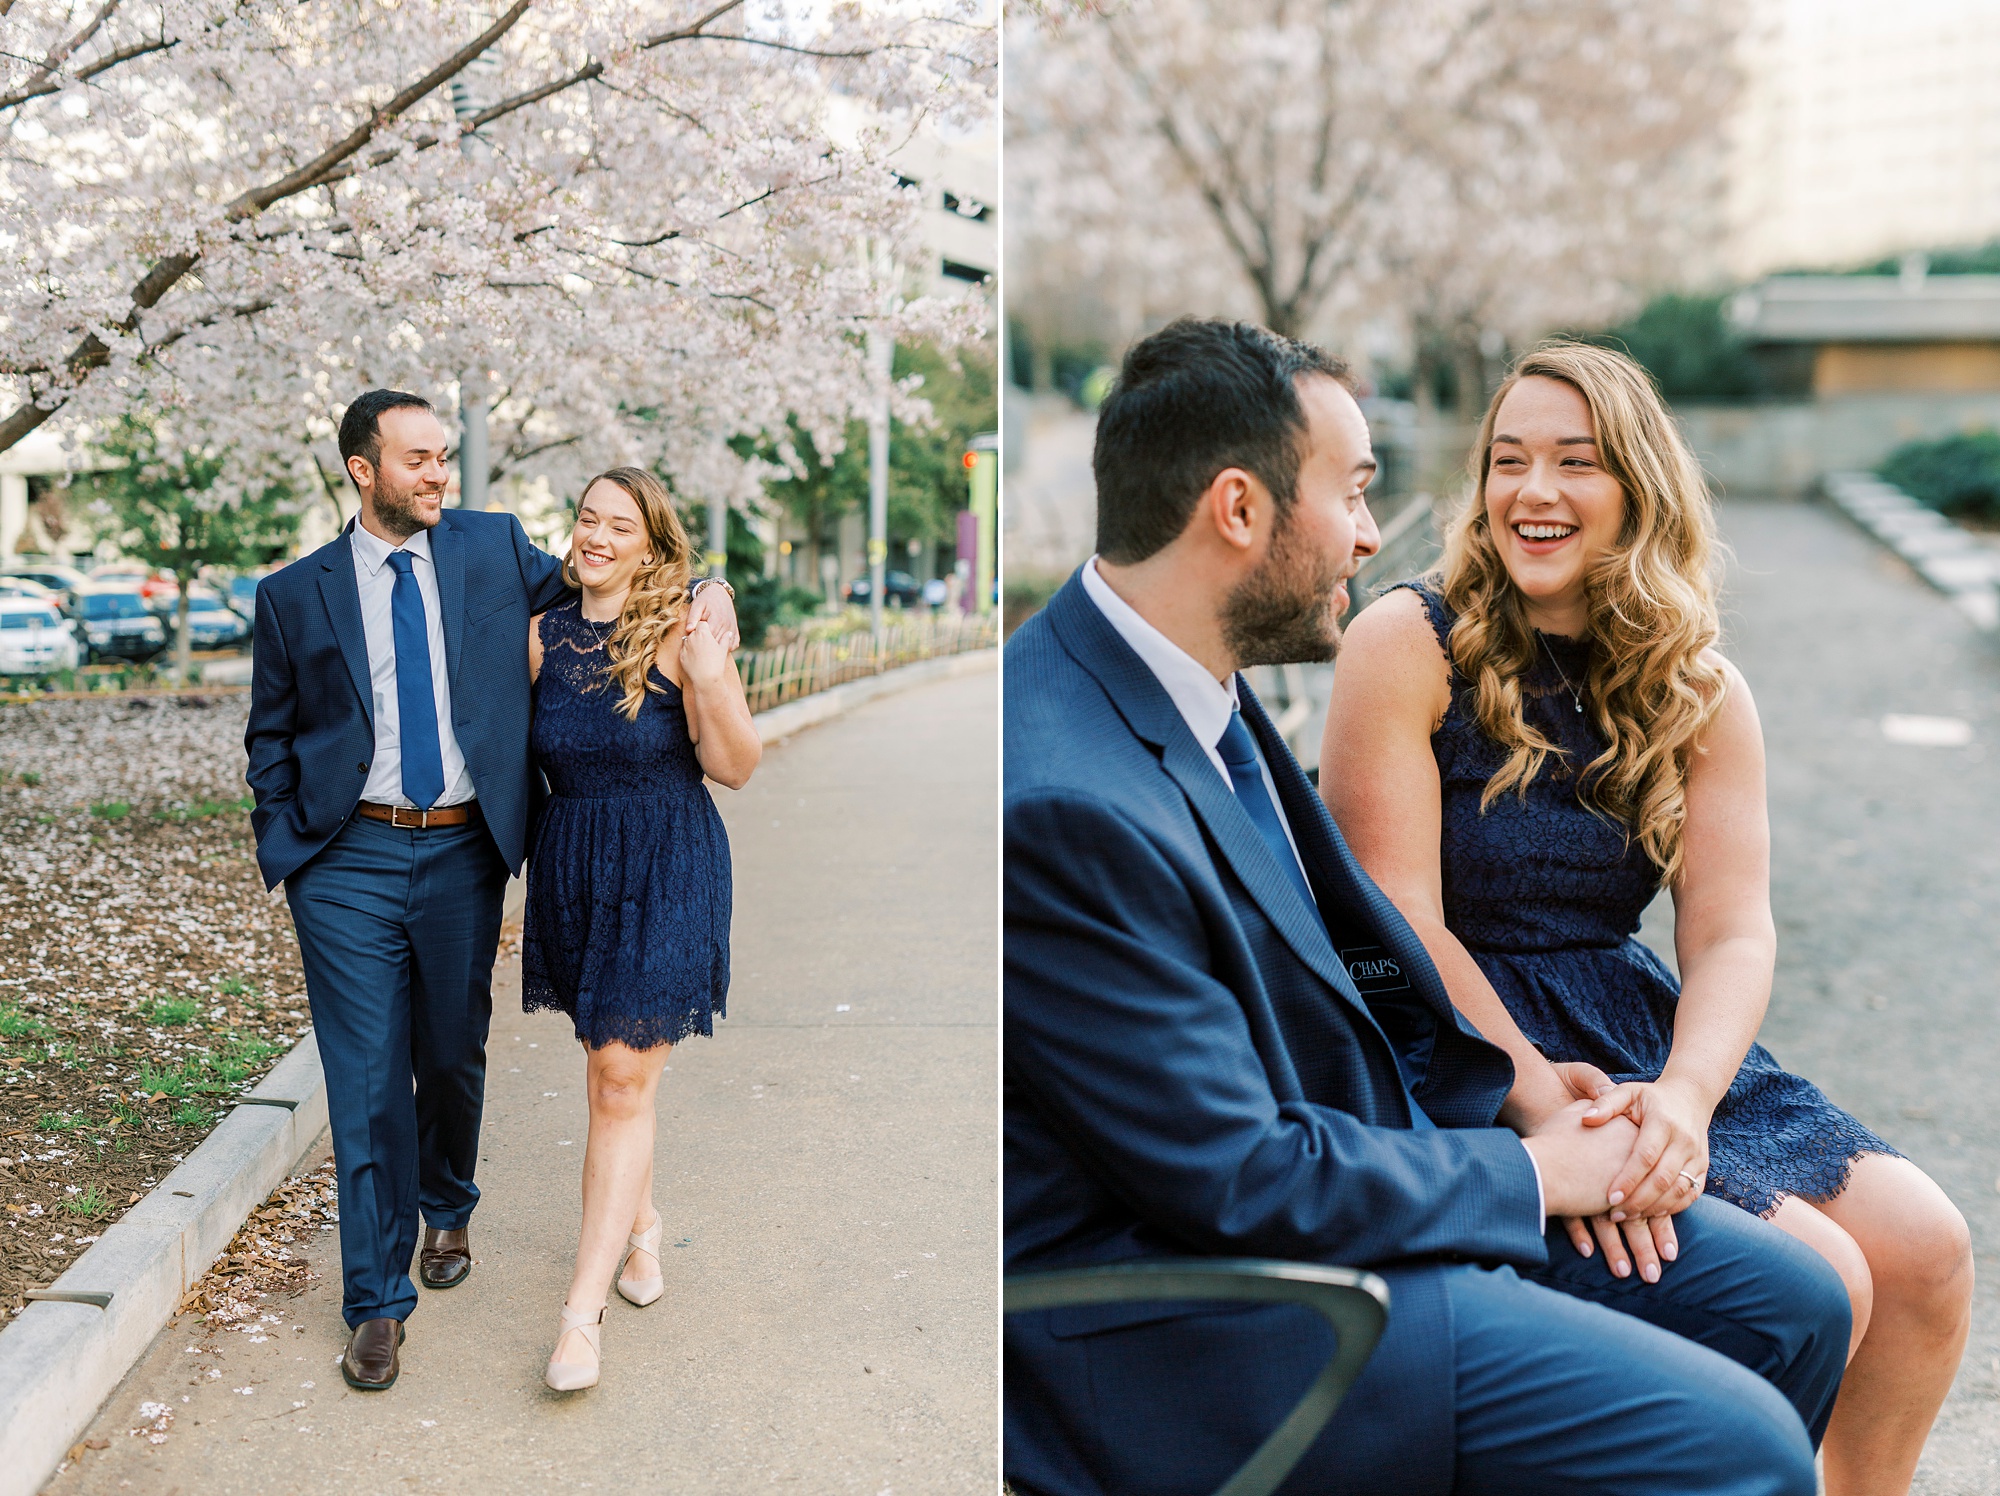 Uptown Charlotte engagement photos in the springtime